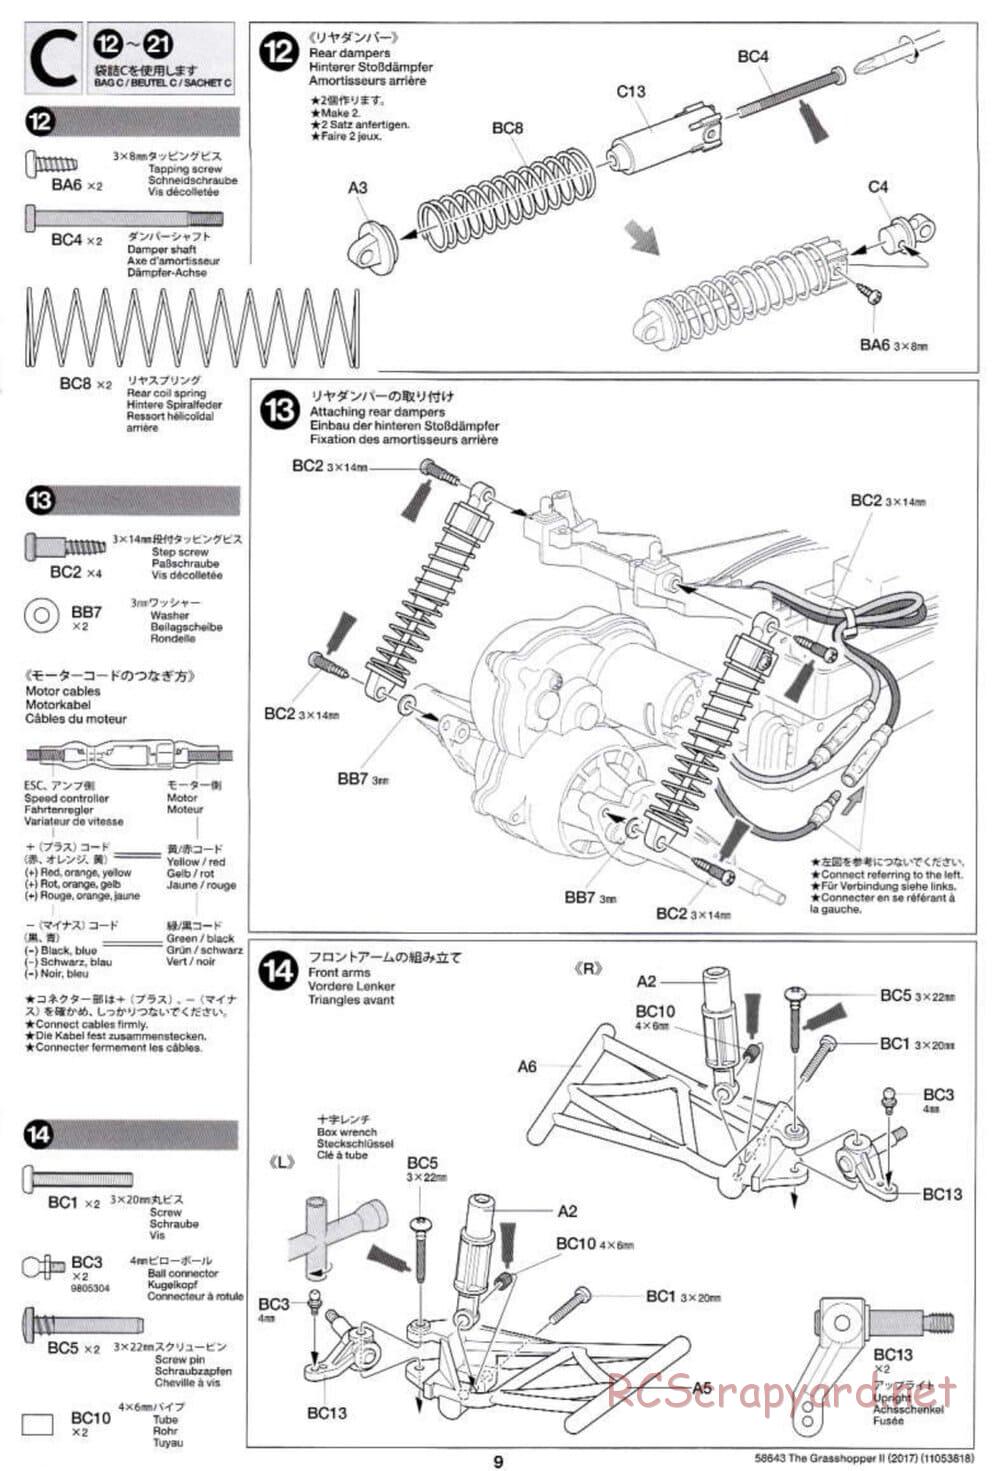 Tamiya - The Grasshopper II (2017) - GH Chassis - Manual - Page 9